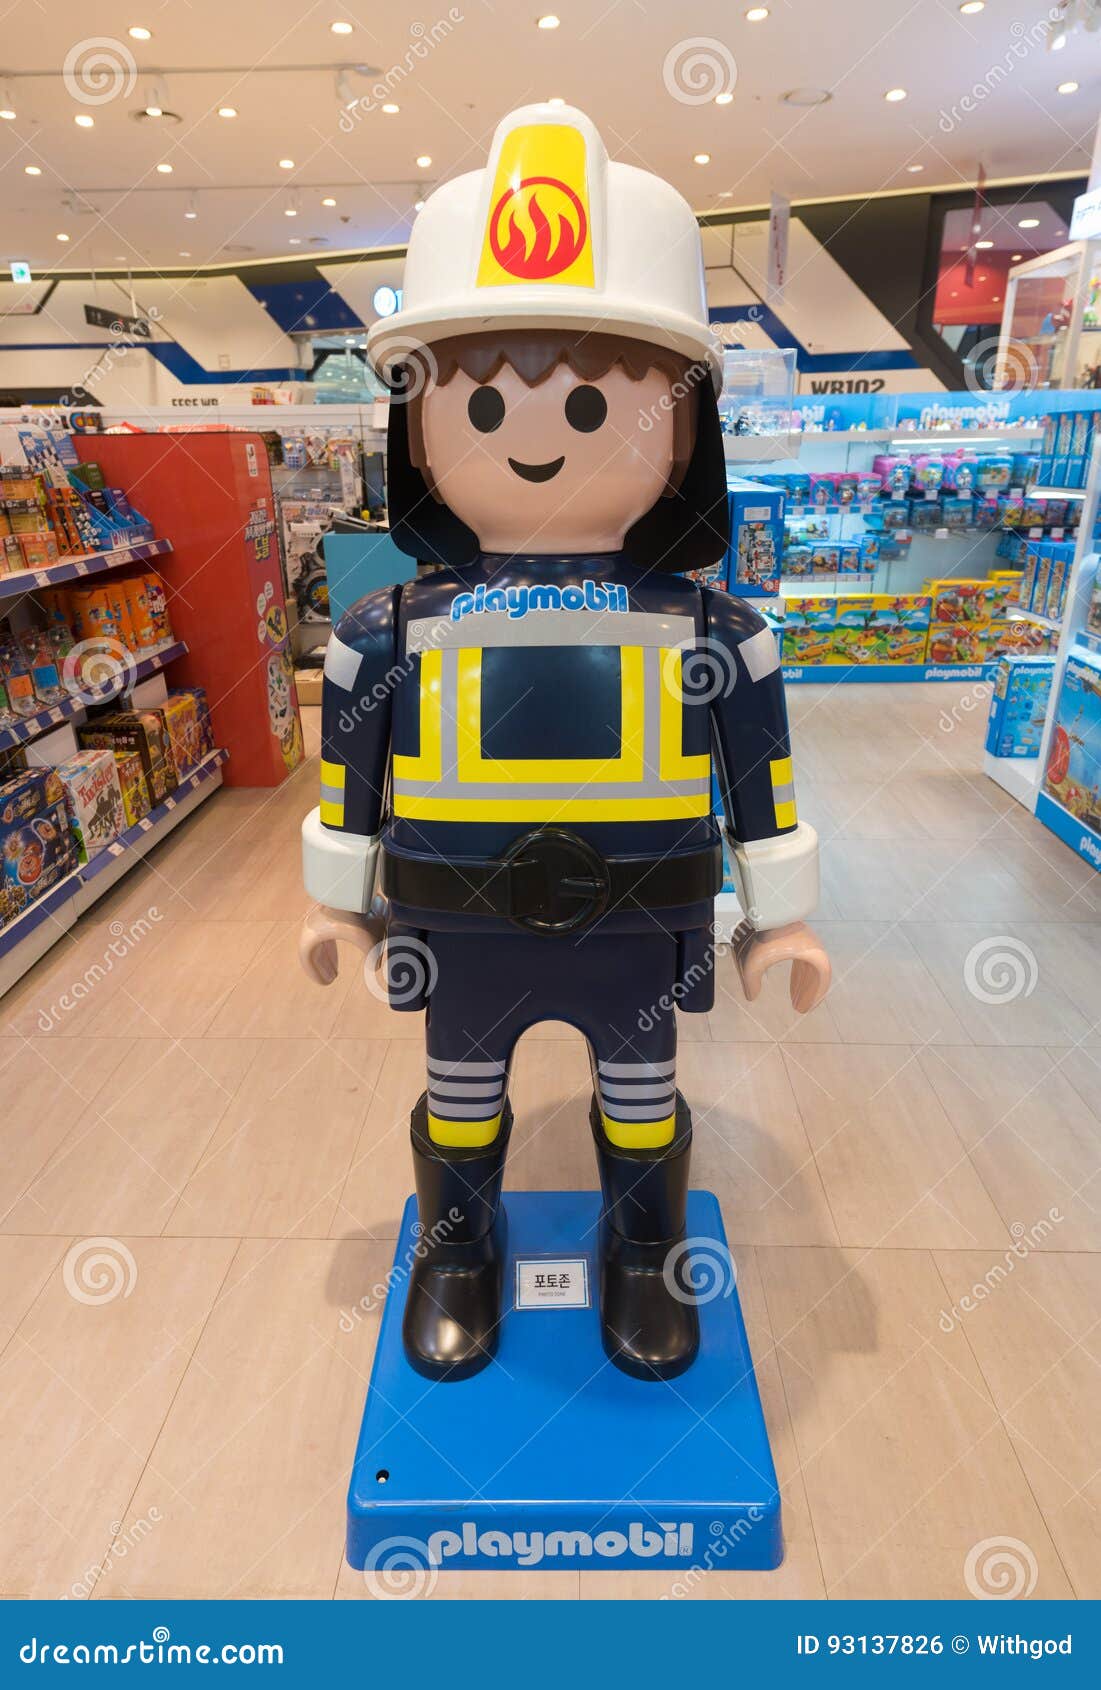 Playmobil Toy at Store, Seoul Editorial Photo - Image of busy, east:  93137826